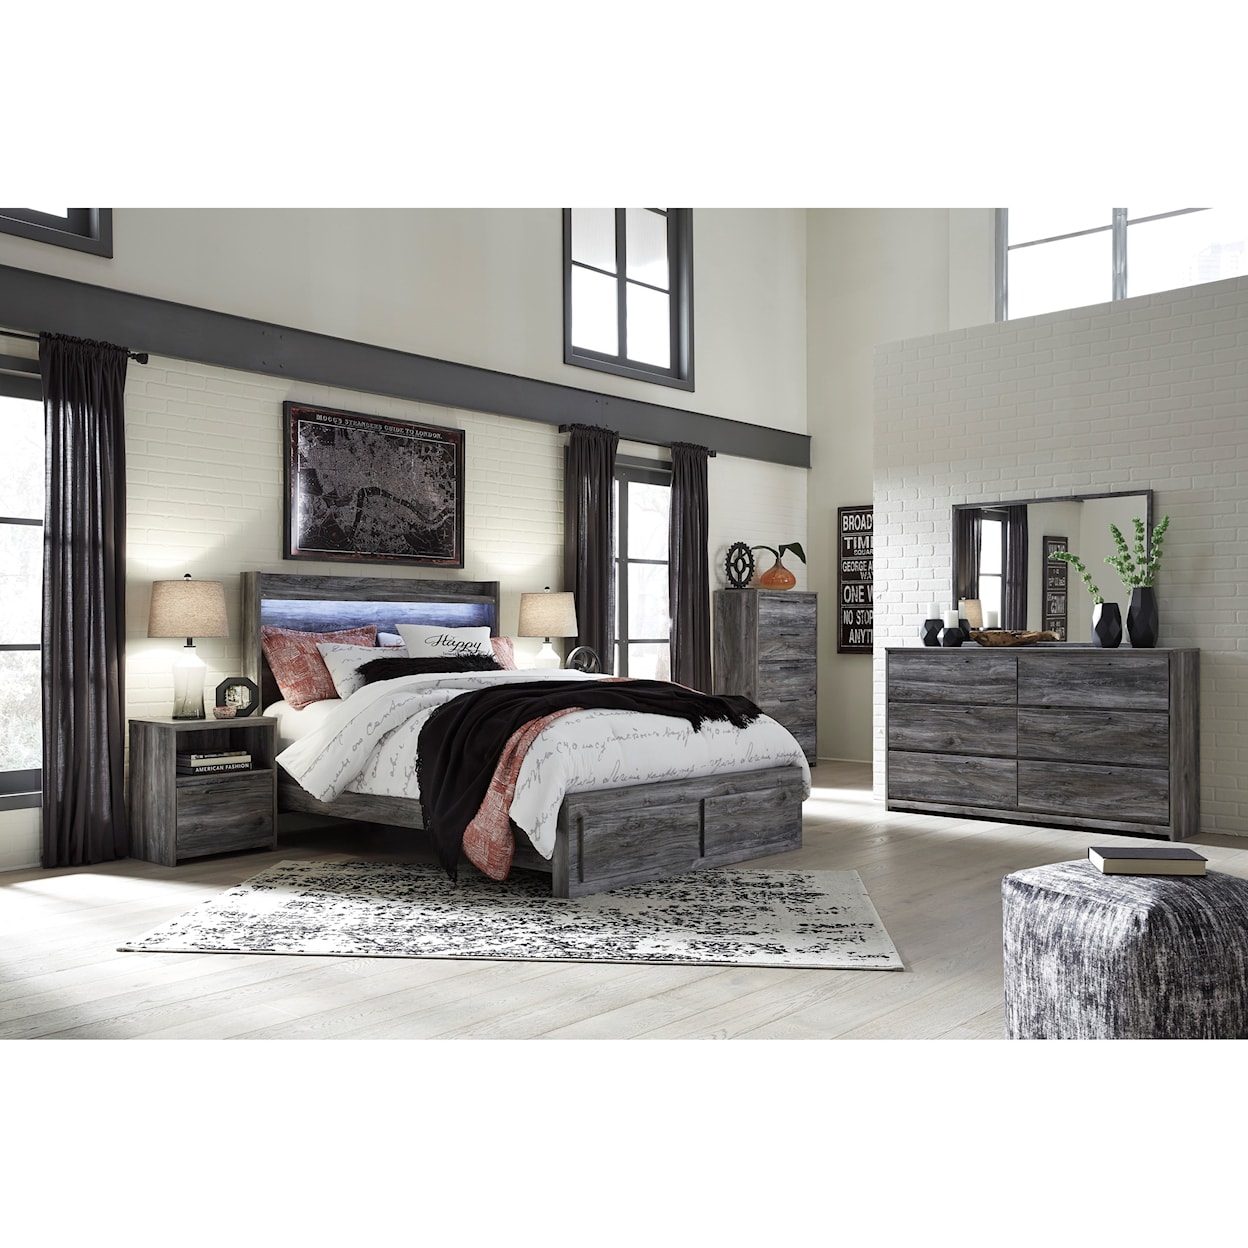 Benchcraft Baystorm Queen Panel Bed with Storage Footboard